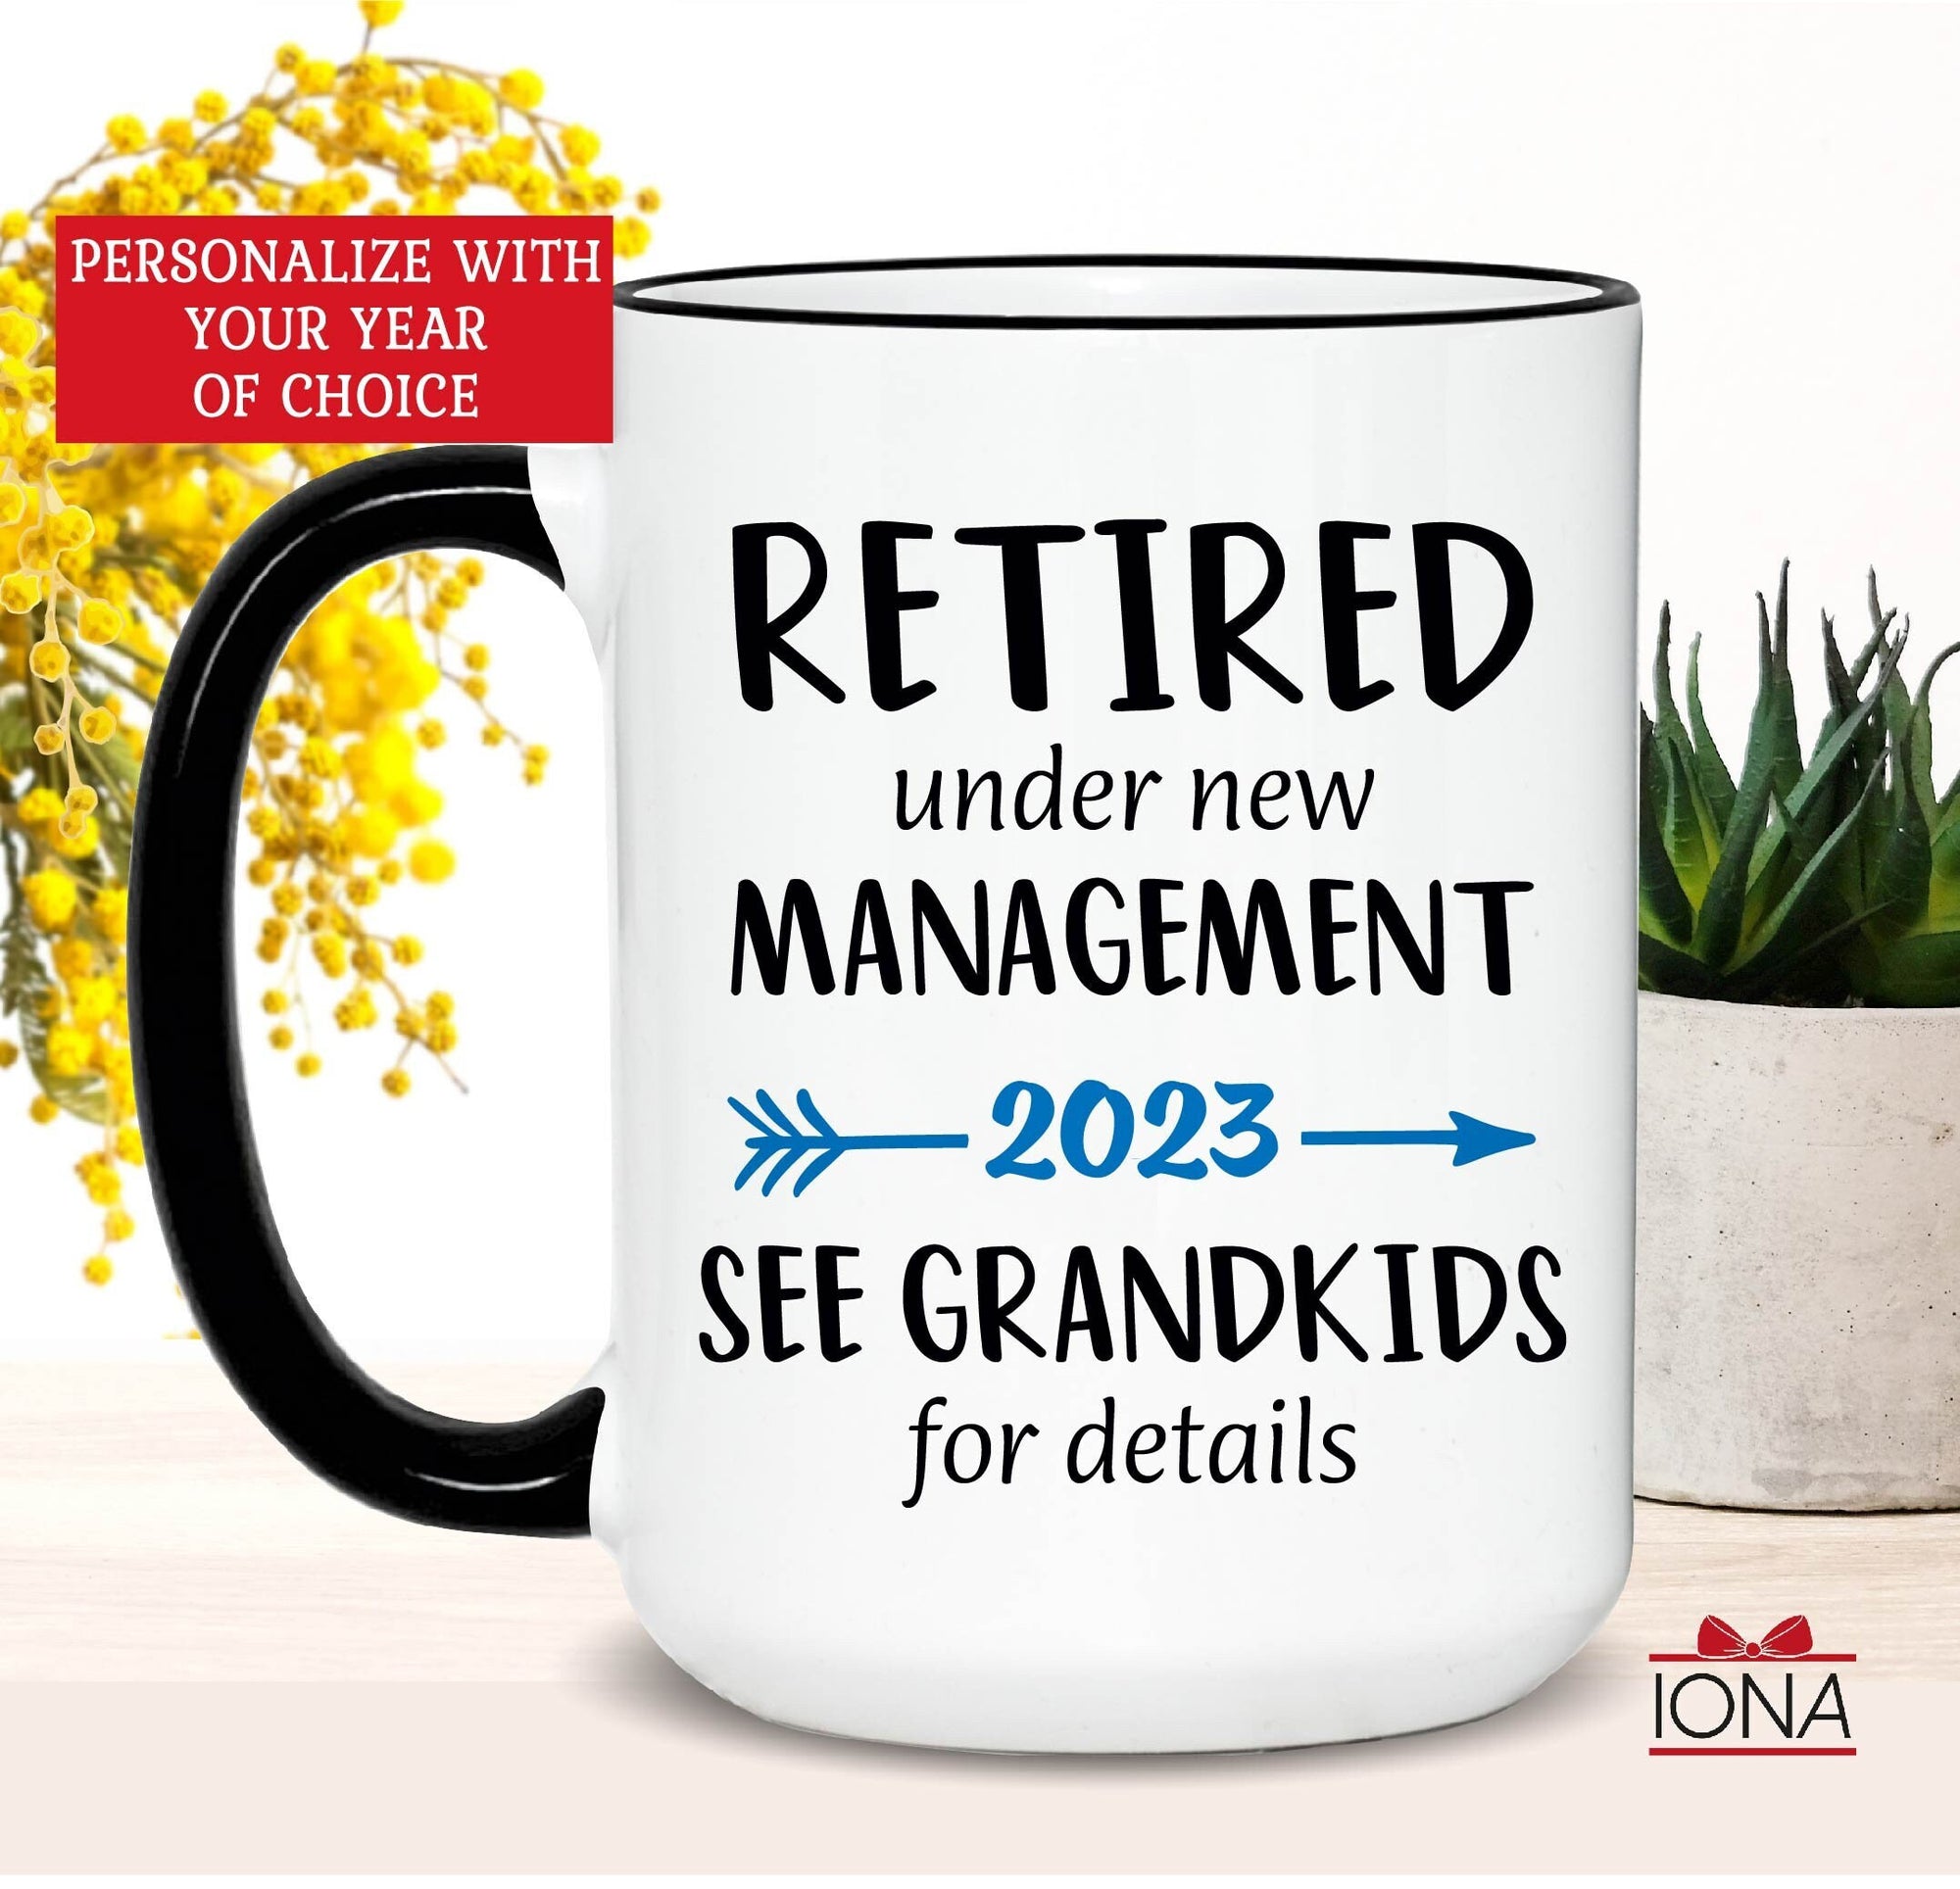 Retirement Gifts for Men, under new management see grandkids, Funny Retirement Gift from Coworkers, 2023 Retirement Gifts, Happy Retirement